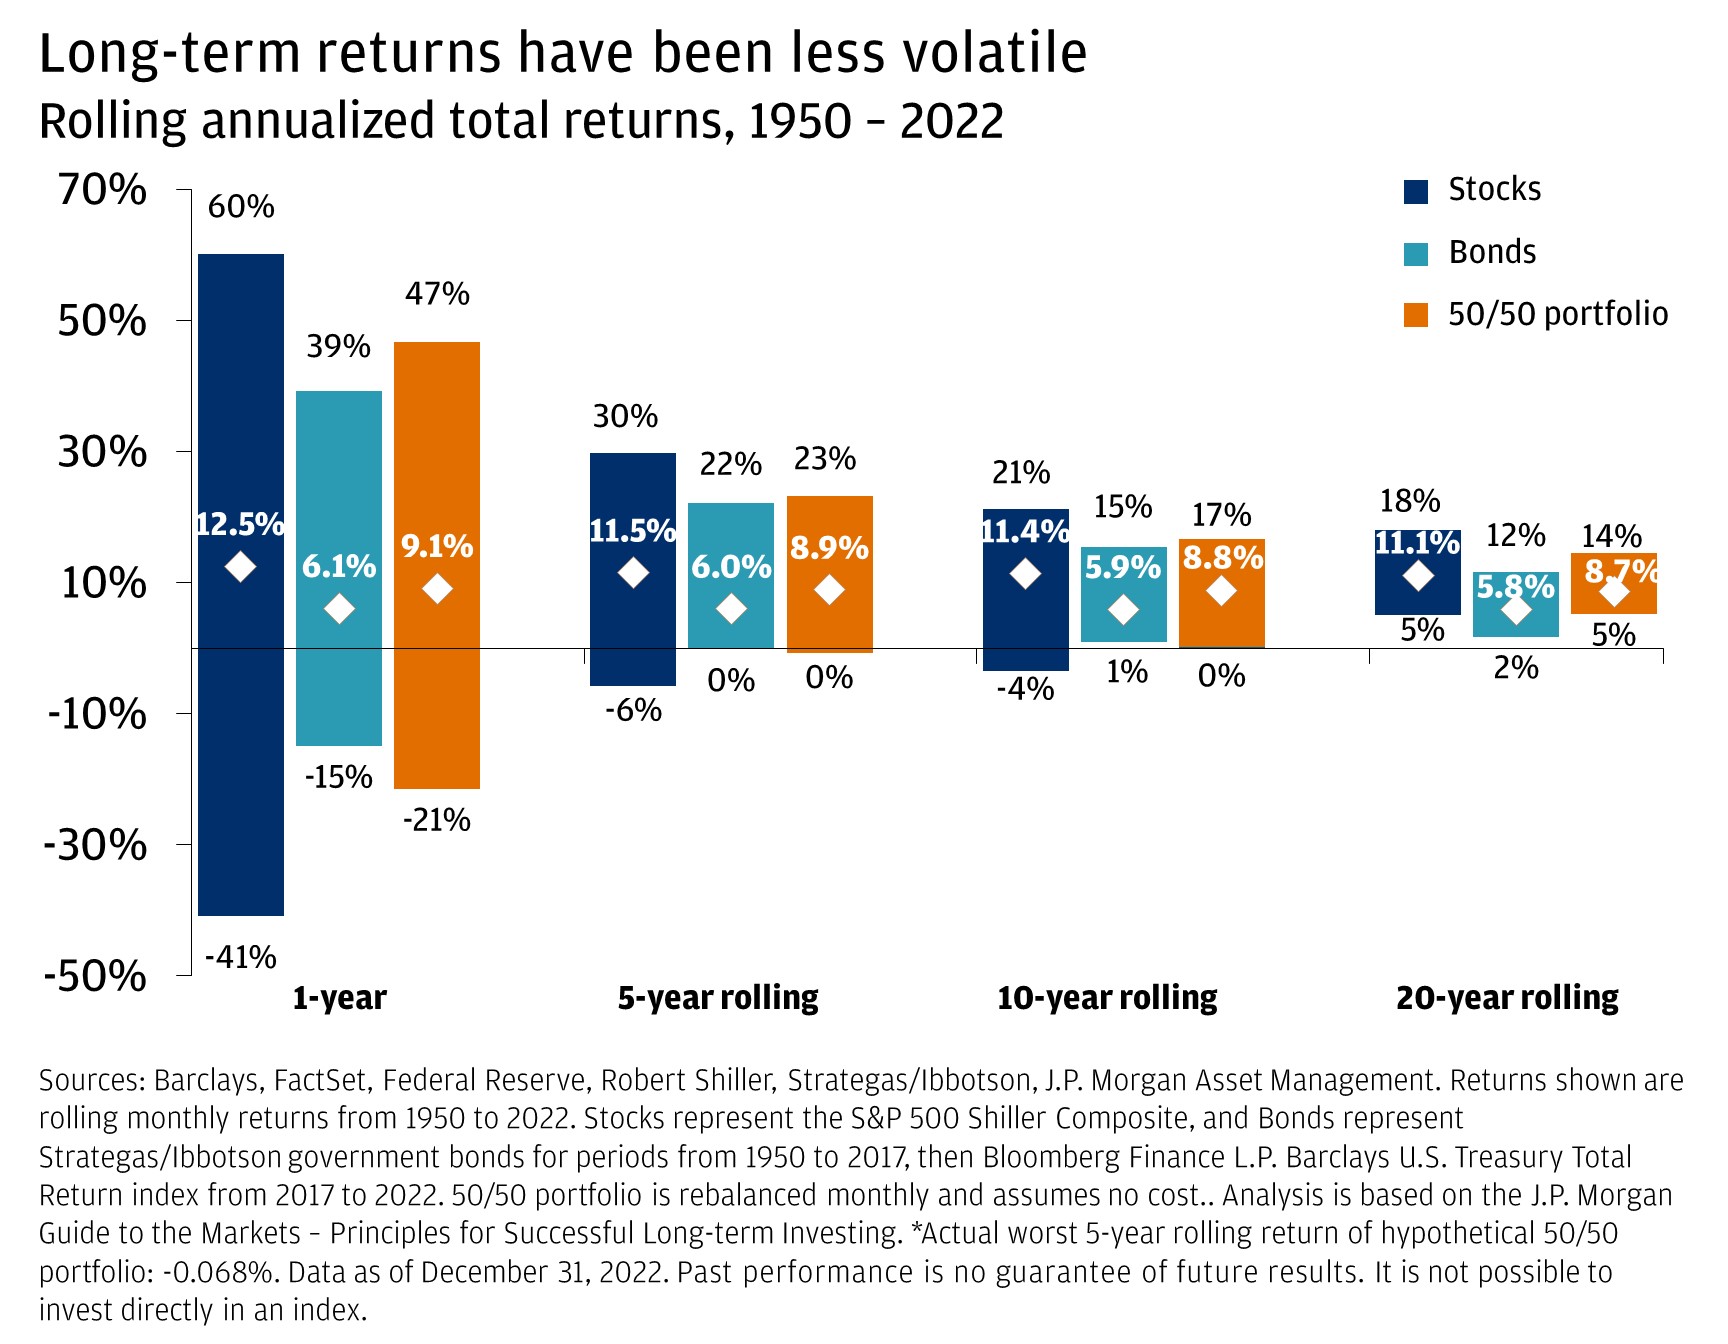 Long-term returns have been less volatile